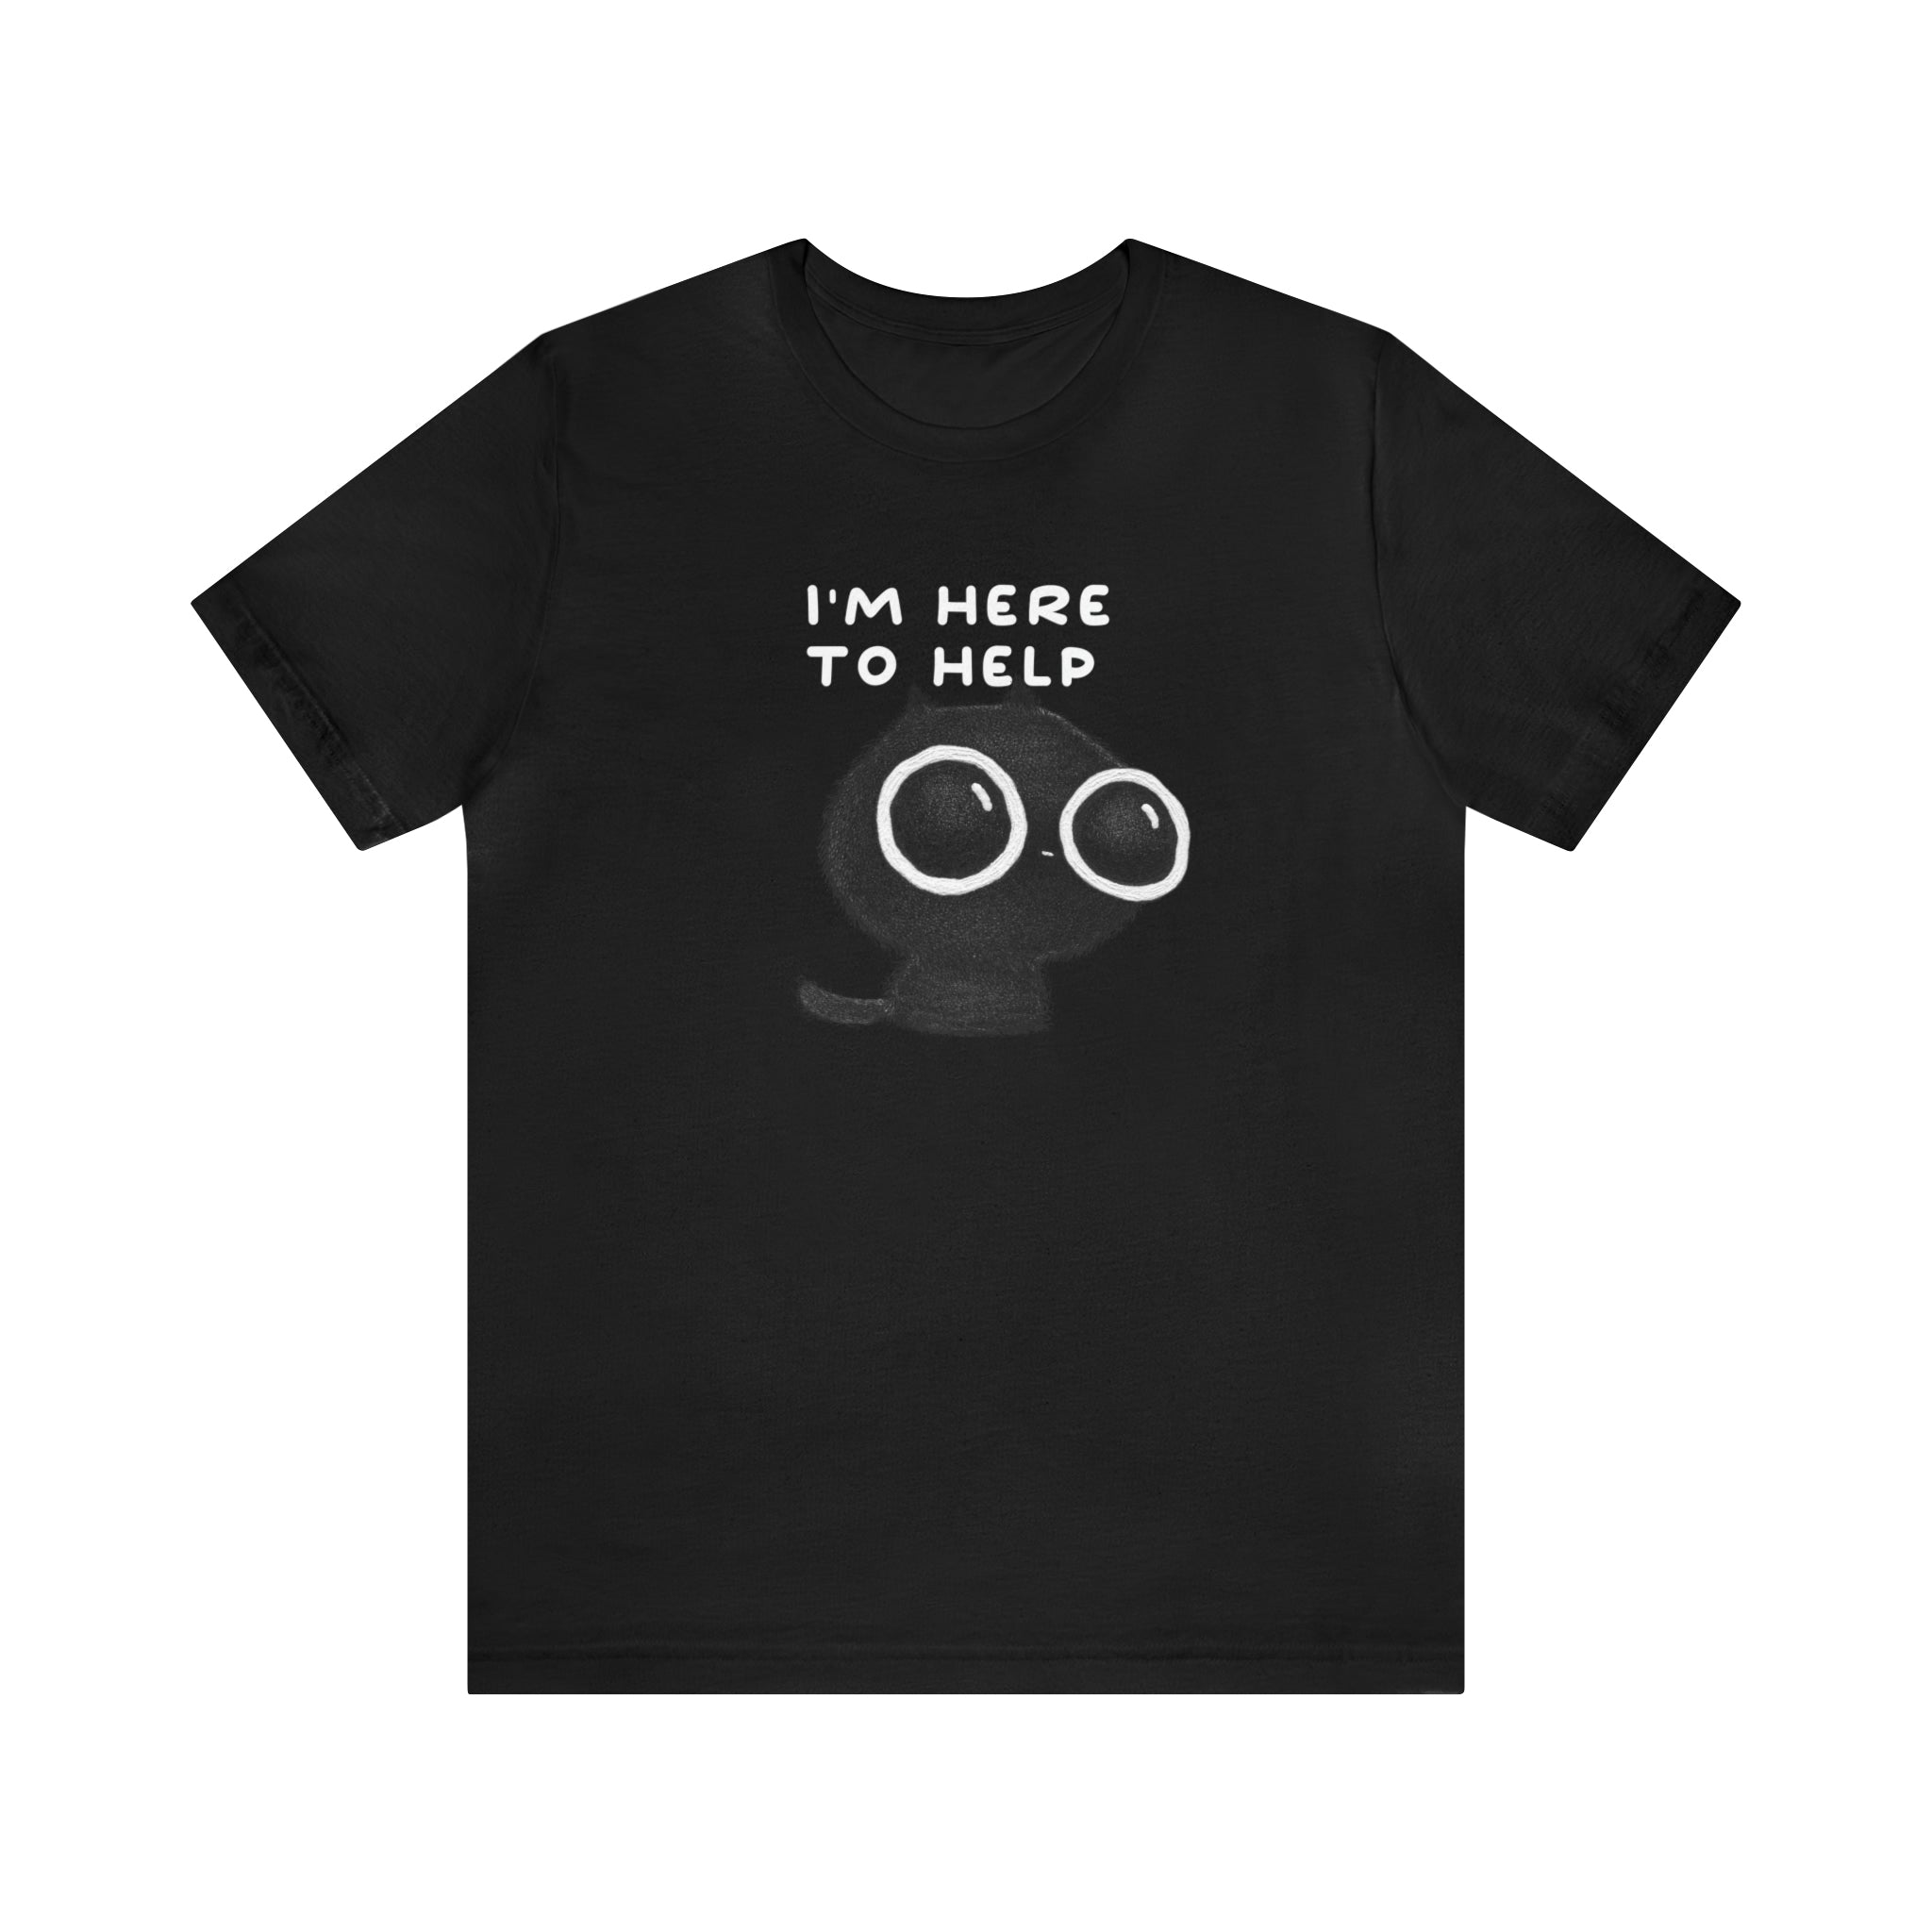 I'm Here to Help : Unisex 100% Comfy Cotton, T-Shirt by Bella+Canvas